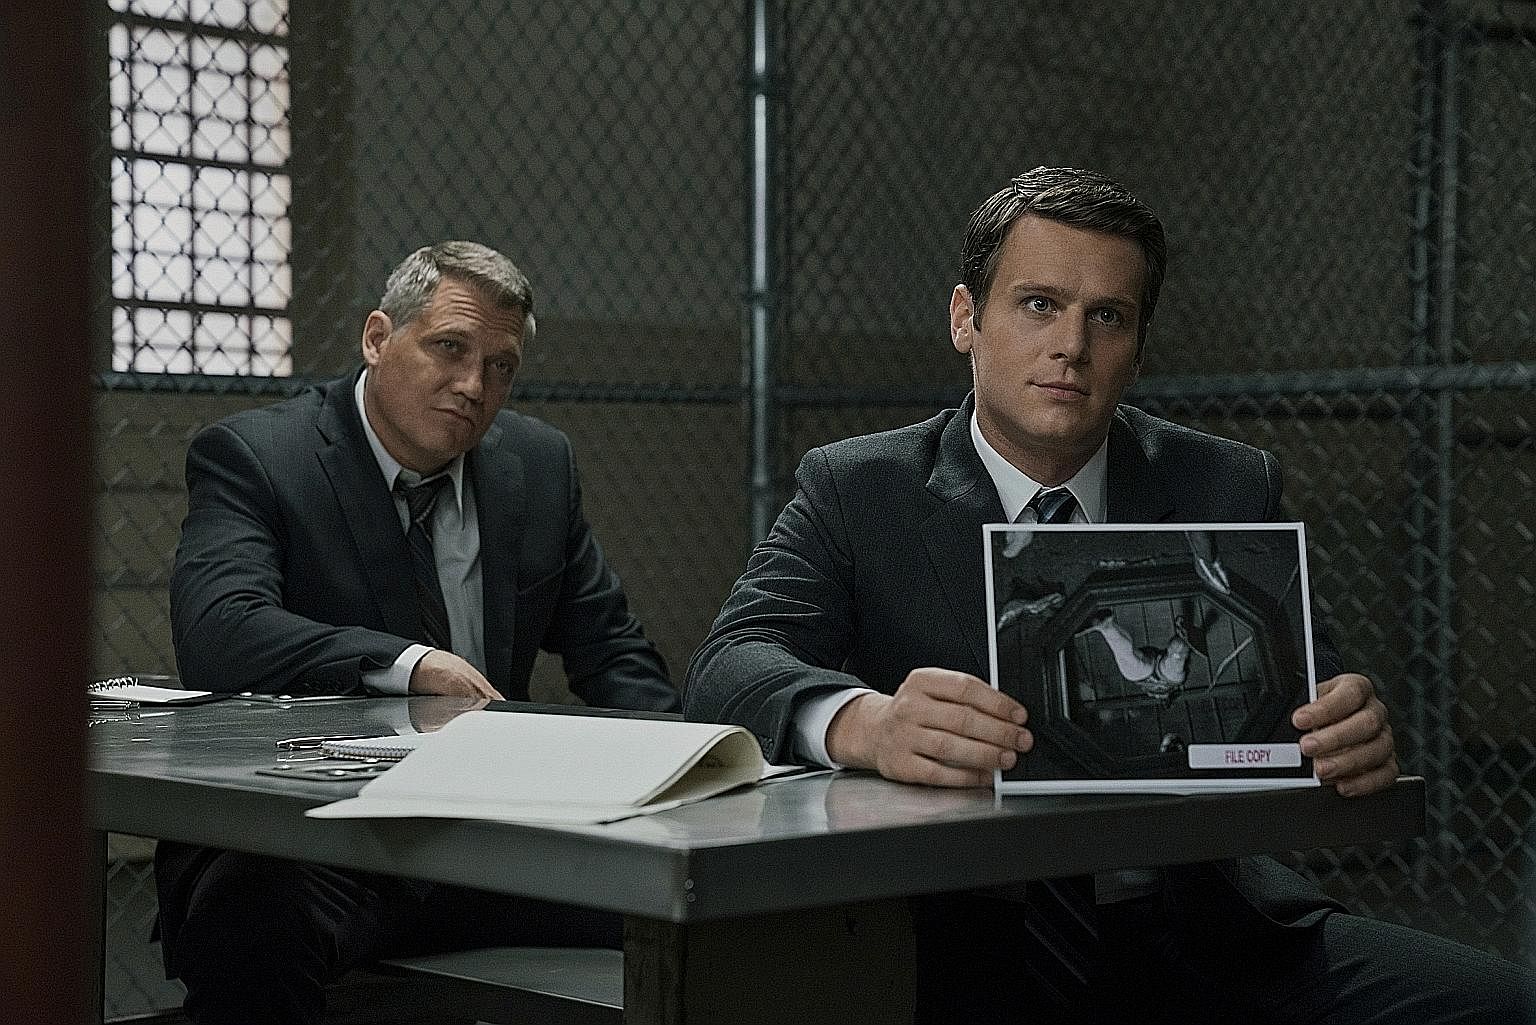 The odd-couple dynamics between Holt McCallany (left) and Jonathan Groff (right) help keep Mindhunter afloat.